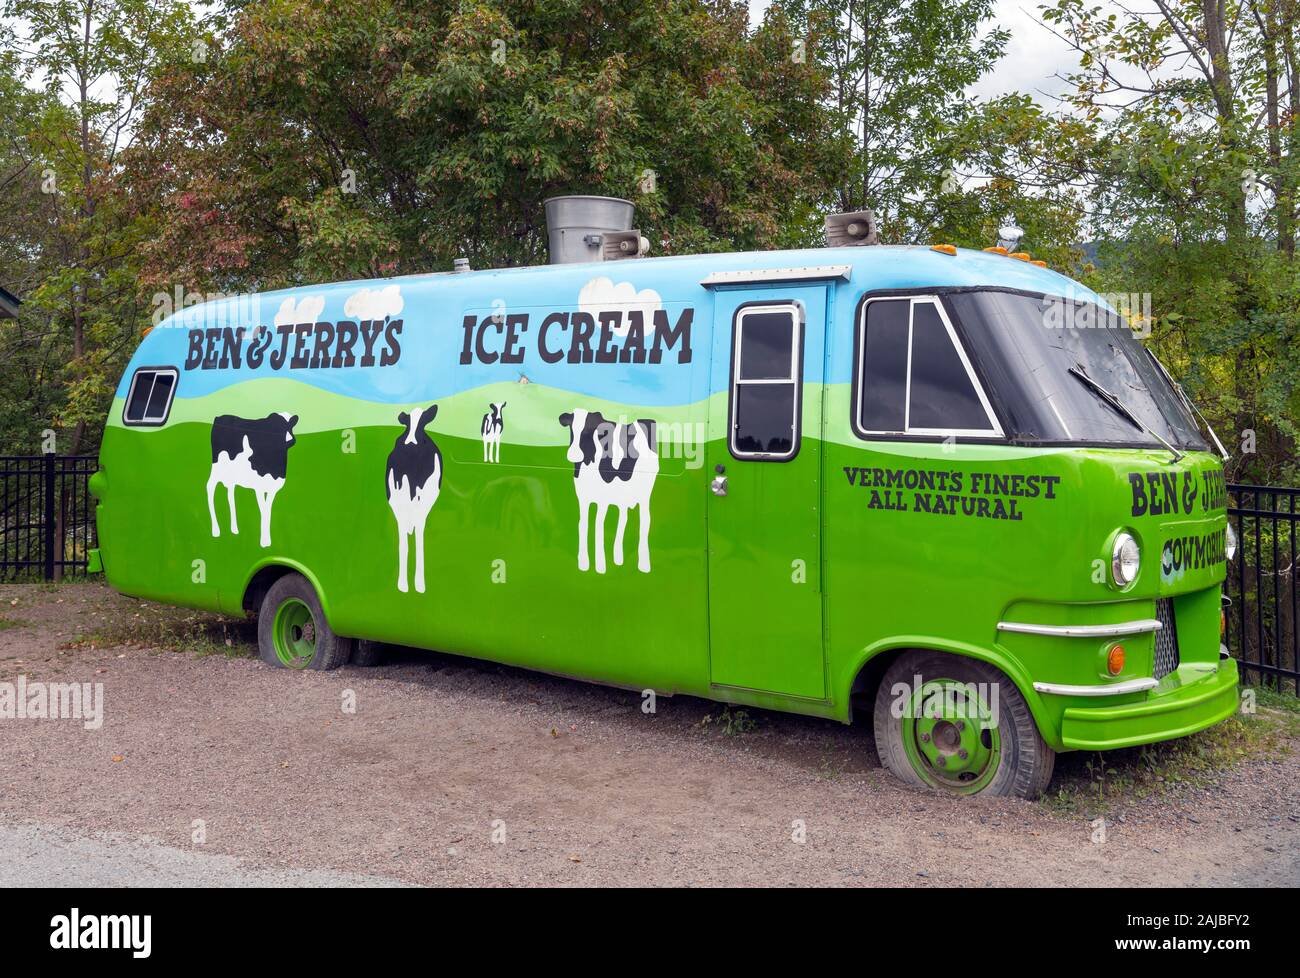 Ben and Jerry's truck at Ben and Jerry's Ice Cream factory in Waterbury, Vermont, USA Stock Photo